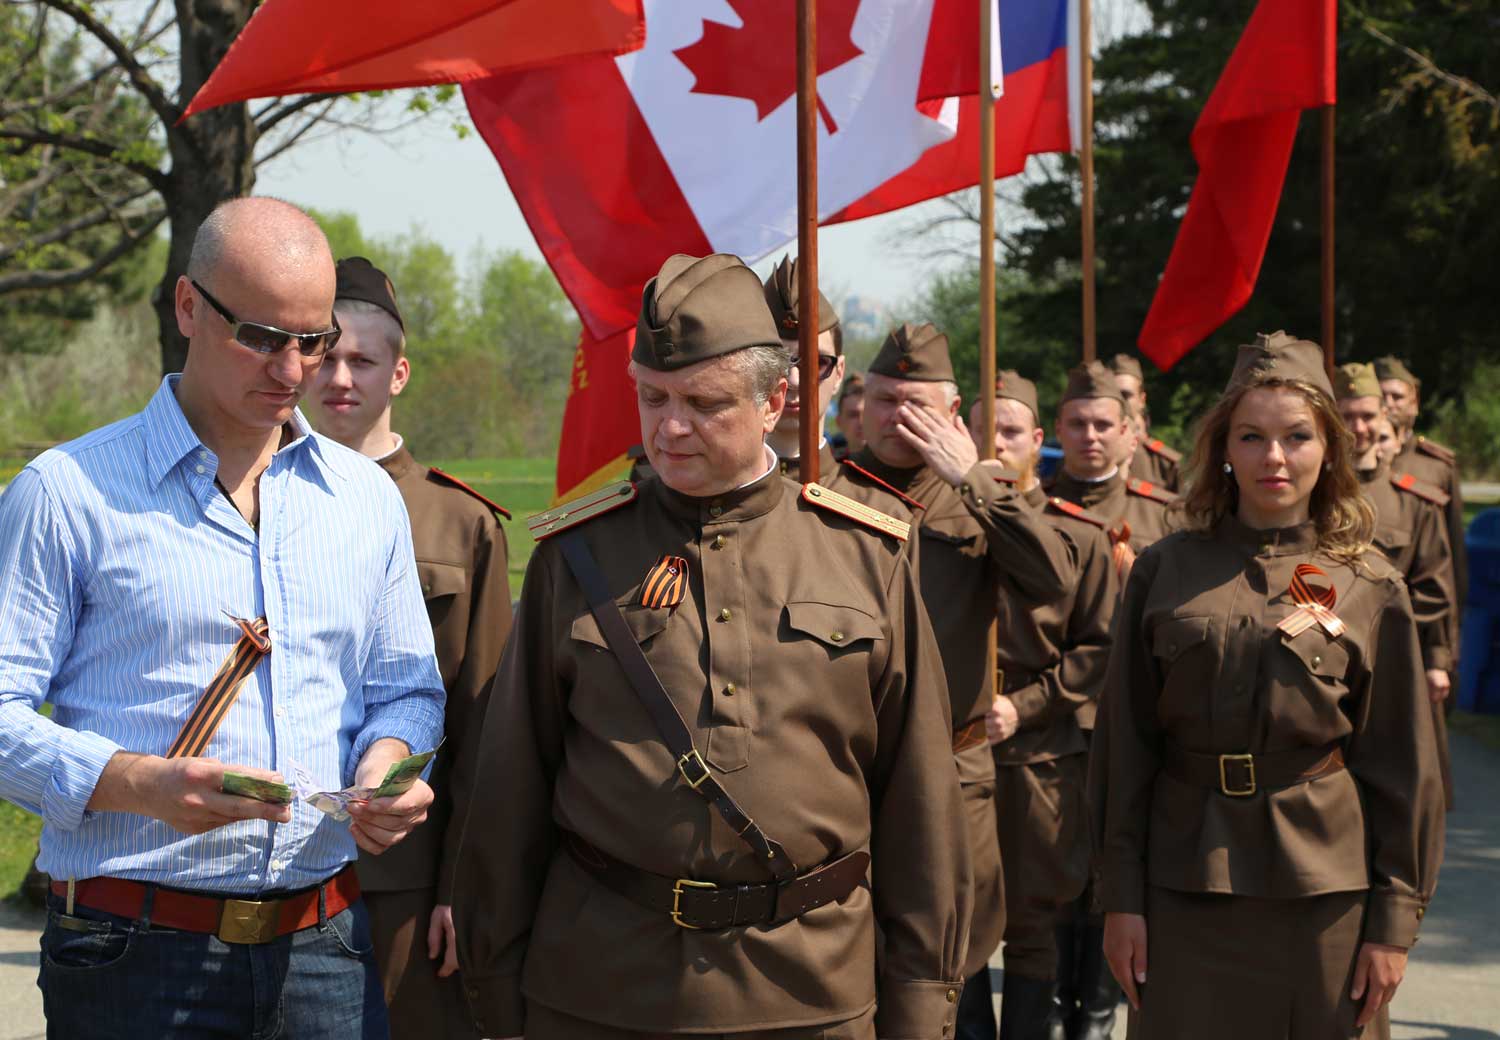 Mock Red Army Soldiers in Toronto Victory Day Celebration 2015 -Photo UpNorth